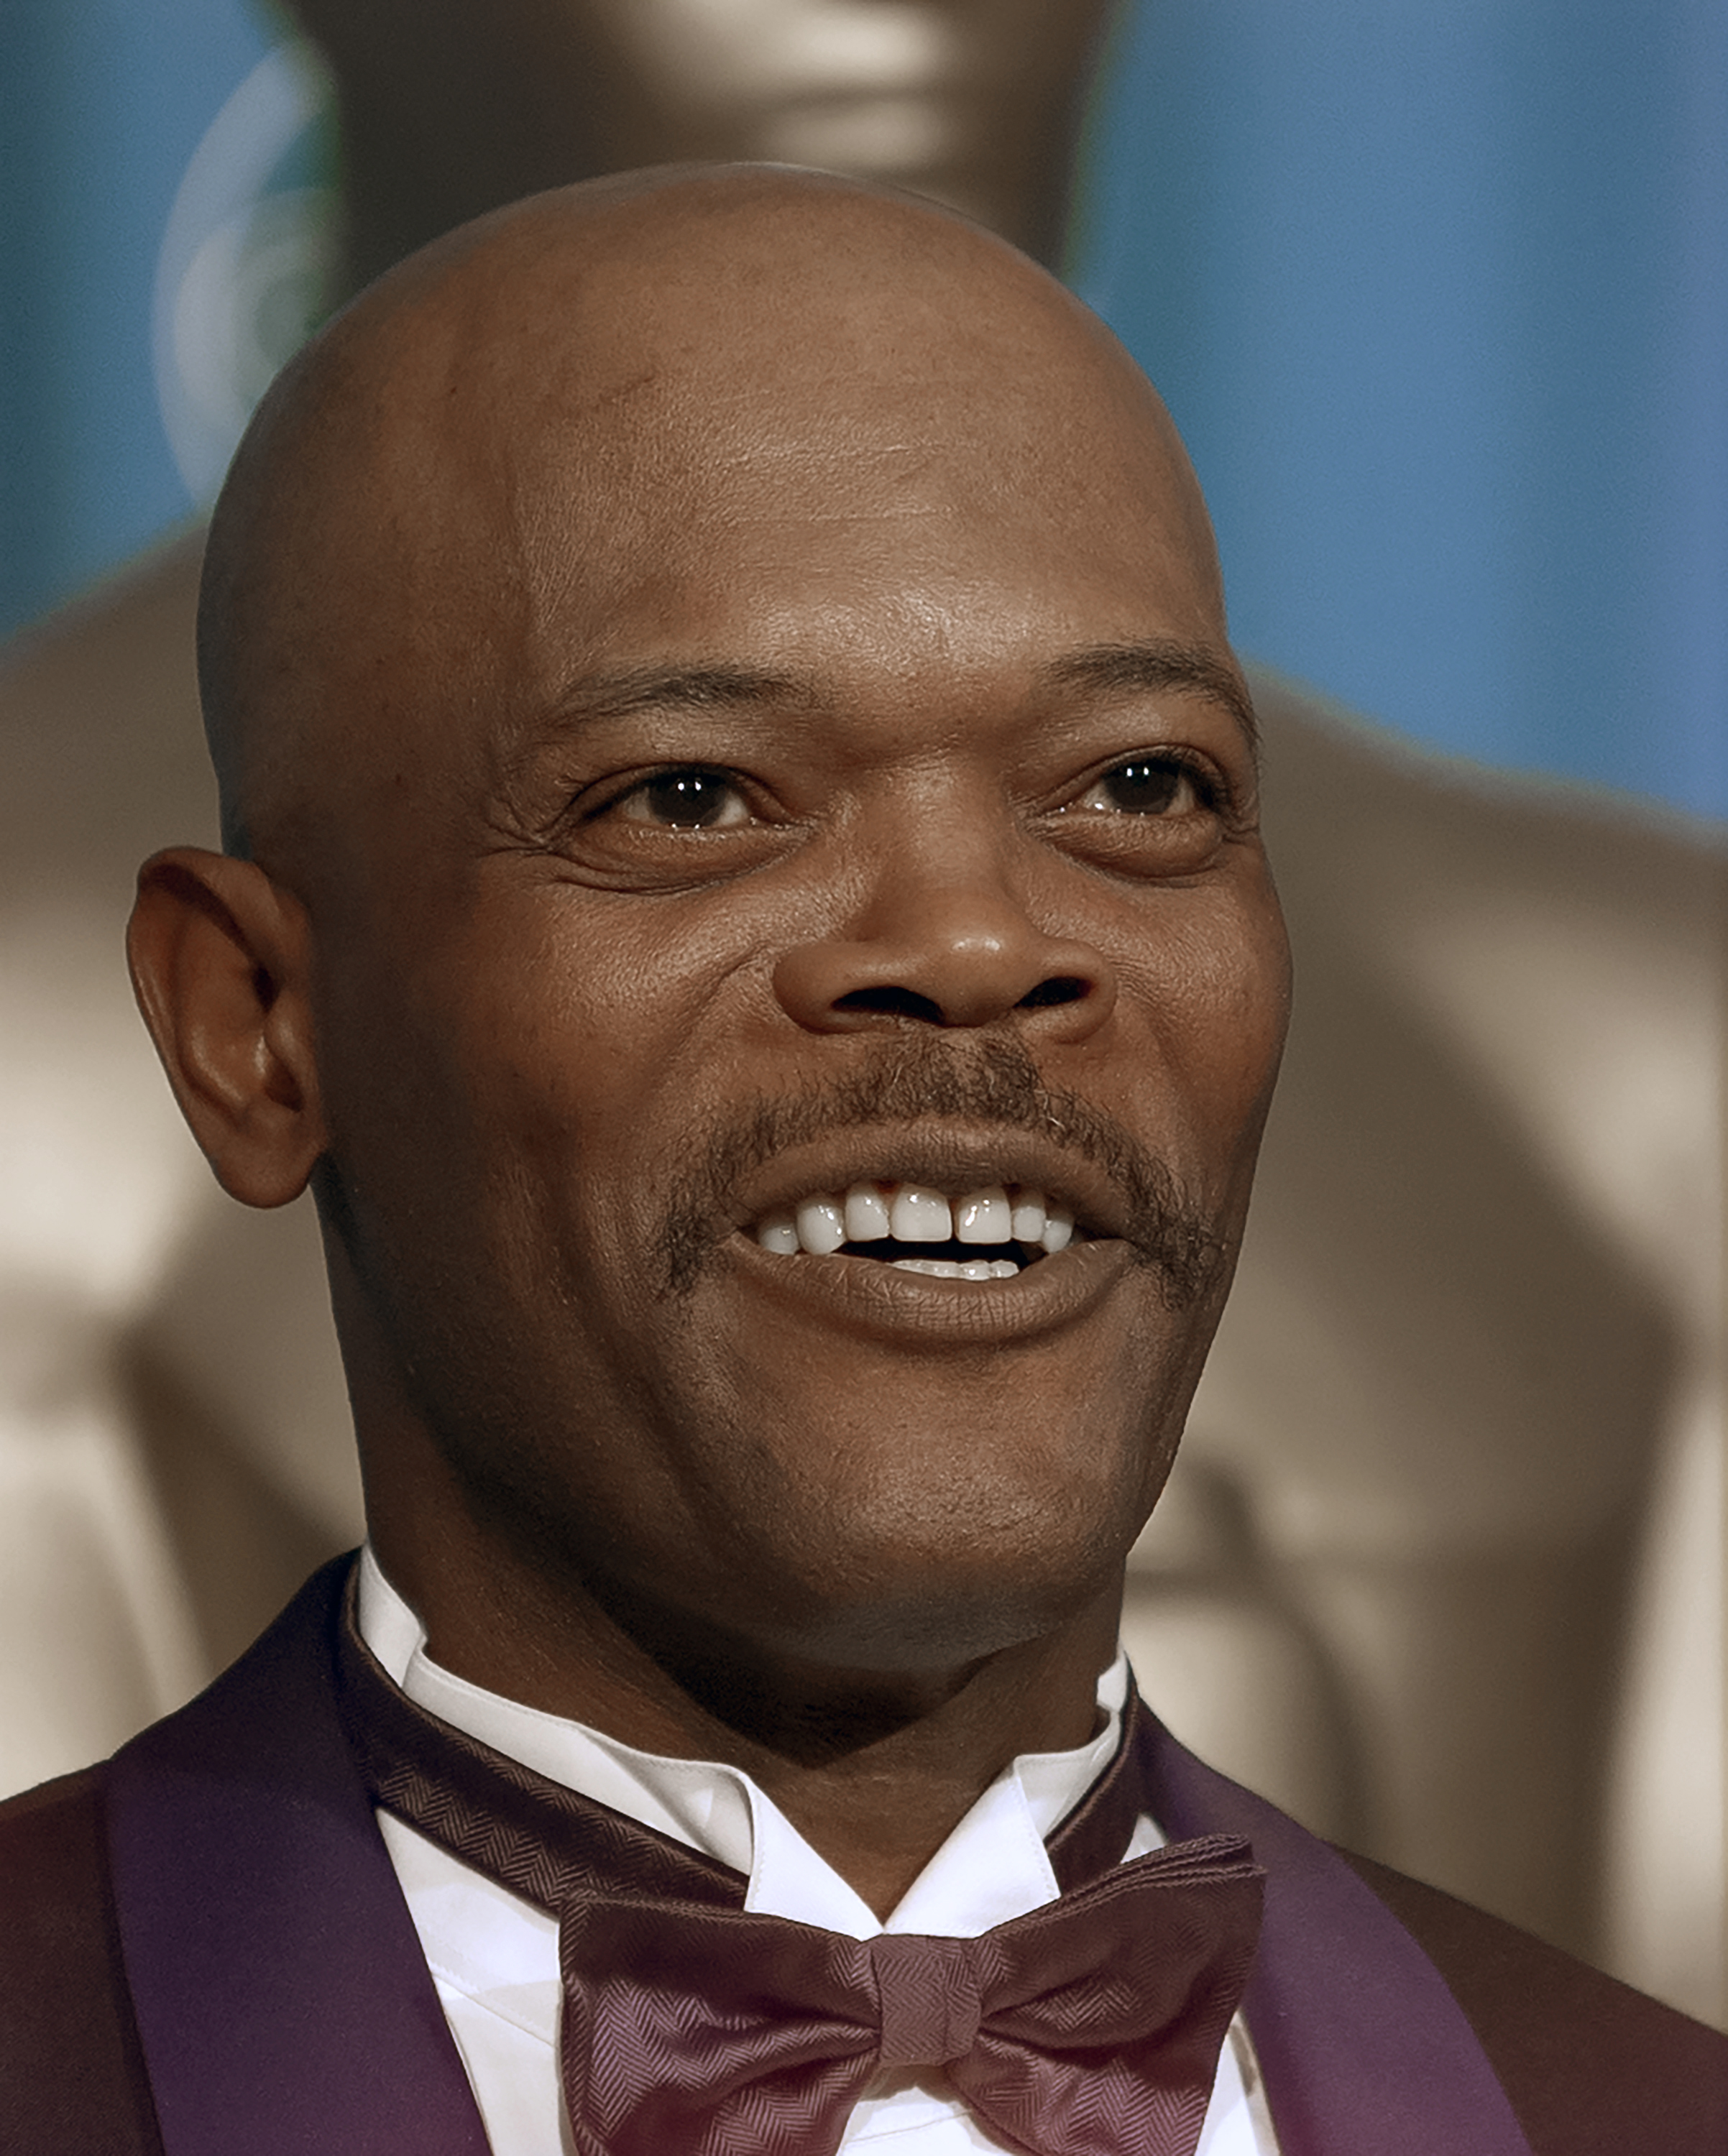 Samuel L Jackson backstage at the Academy Awards, March 23, 1998 in Los Angeles, California| Source: Getty Images